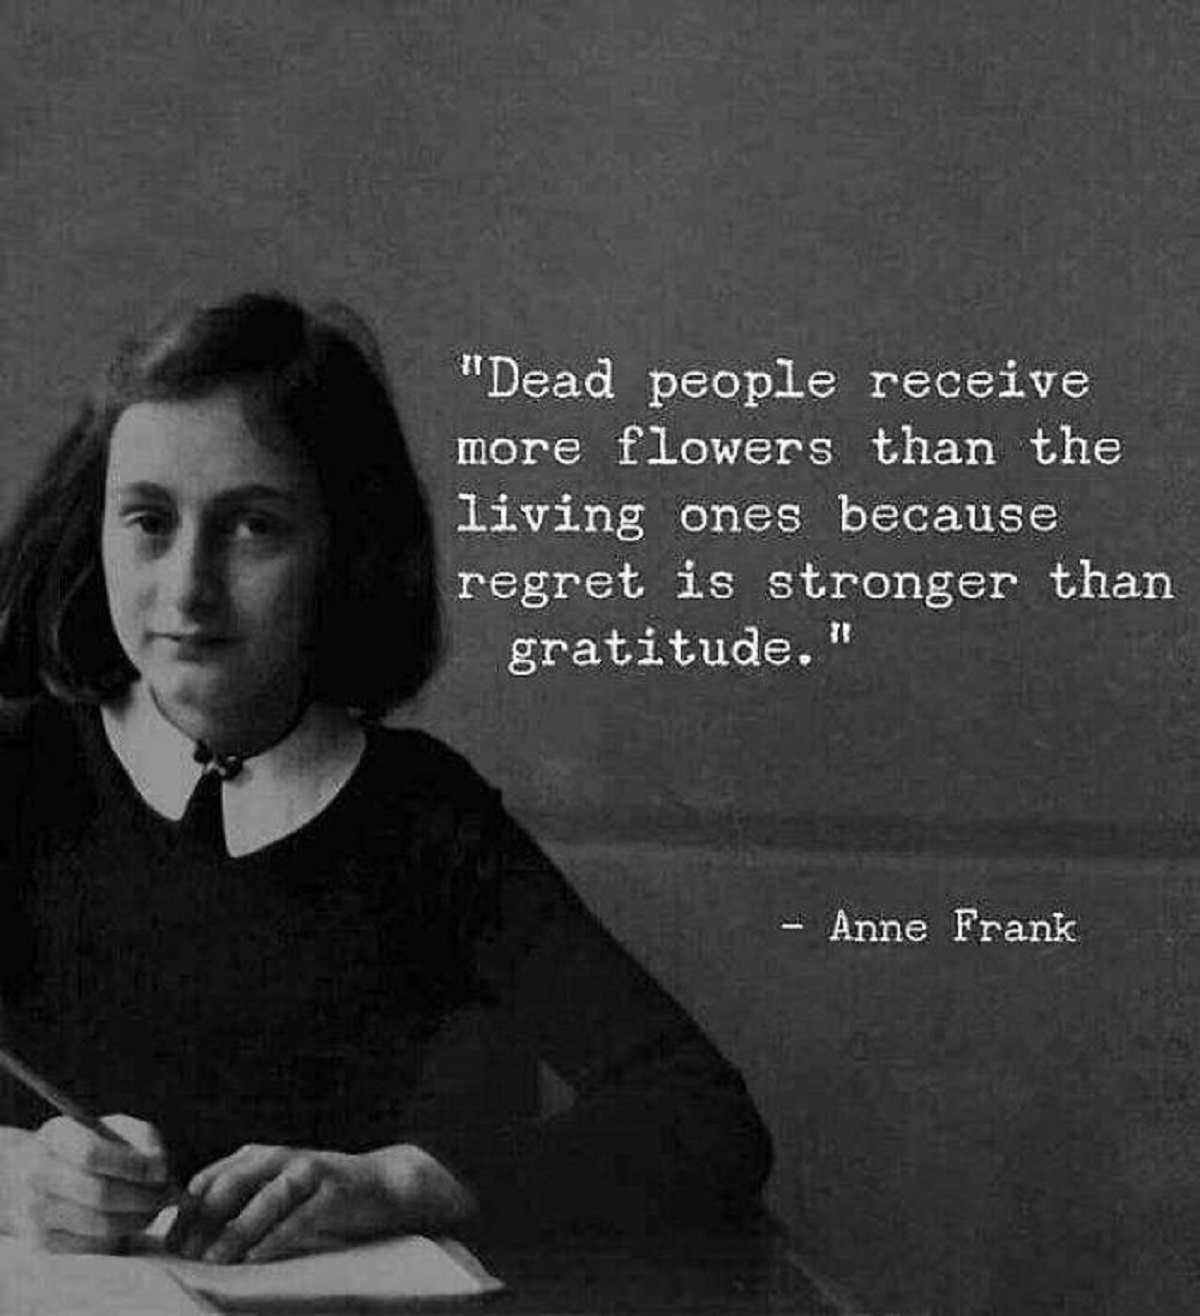 best reality quotes - "Dead people receive more flowers than the living ones because regret is stronger than gratitude. Anne Frank